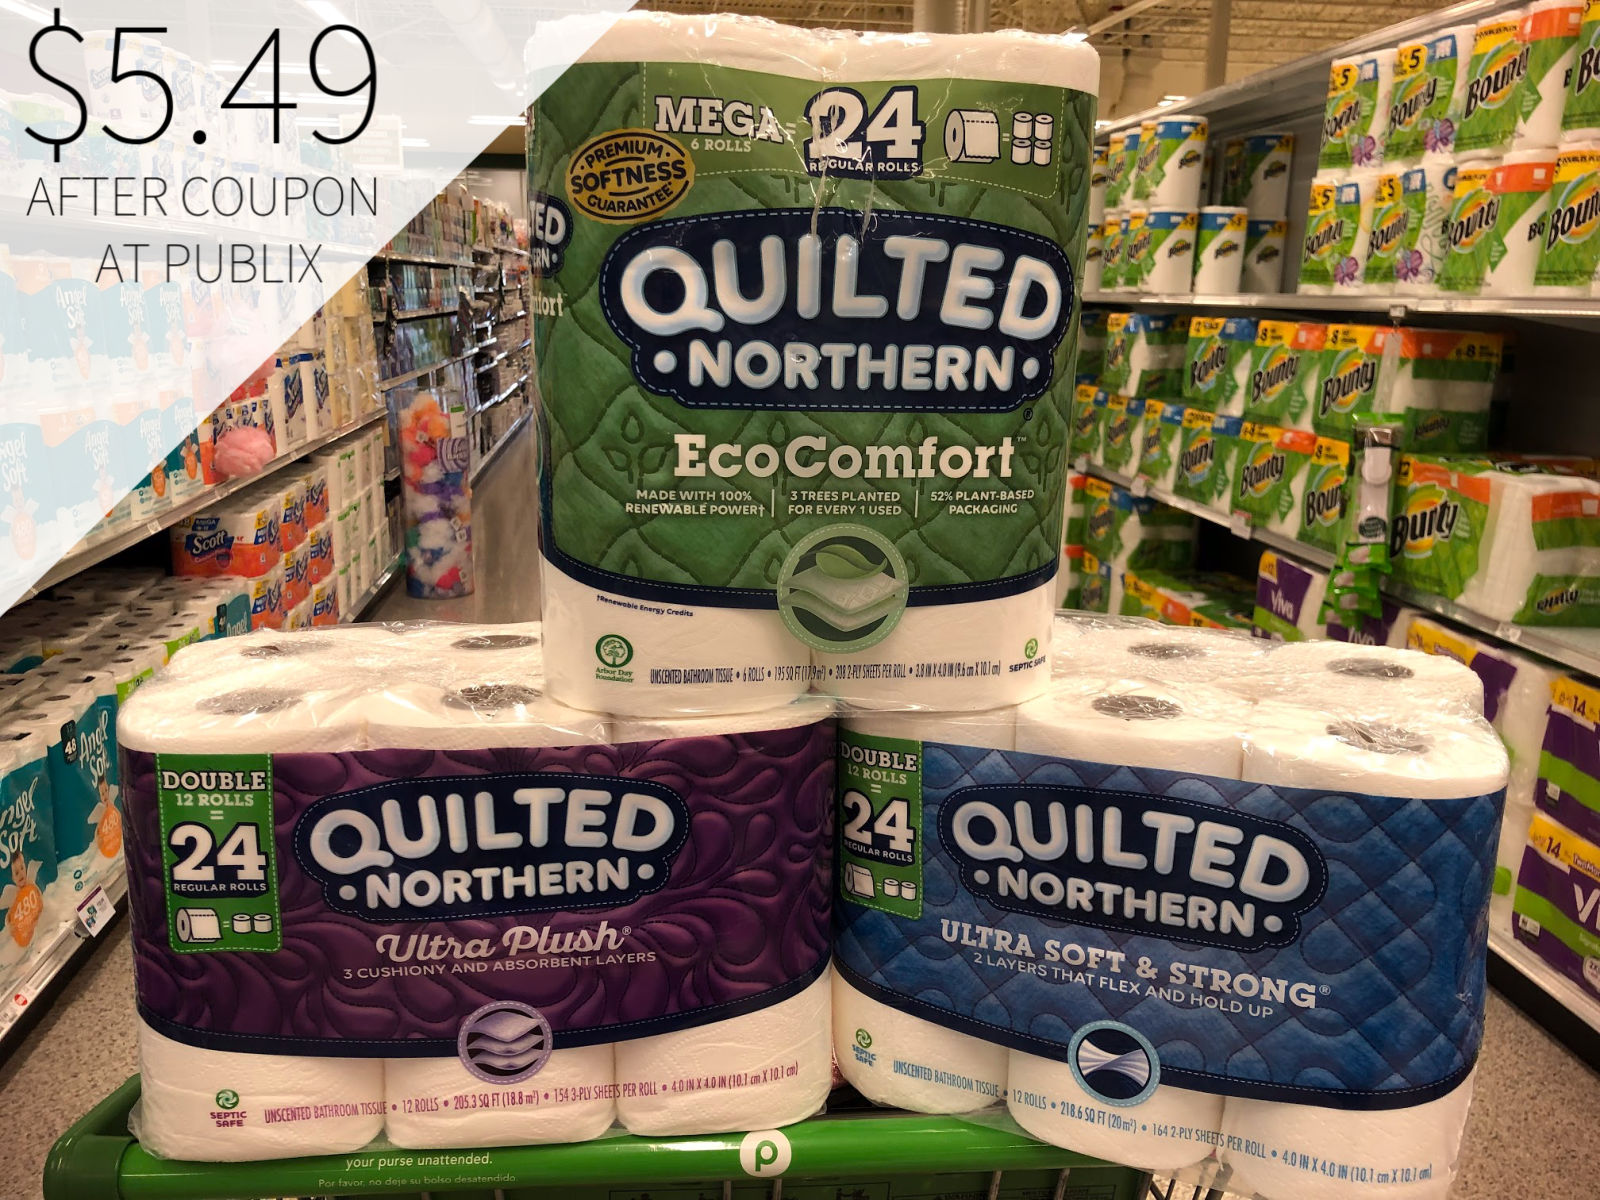 Quilted Northern Soft & Strong Bathroom Tissue, Unscented, 2-Ply, Toilet  Paper